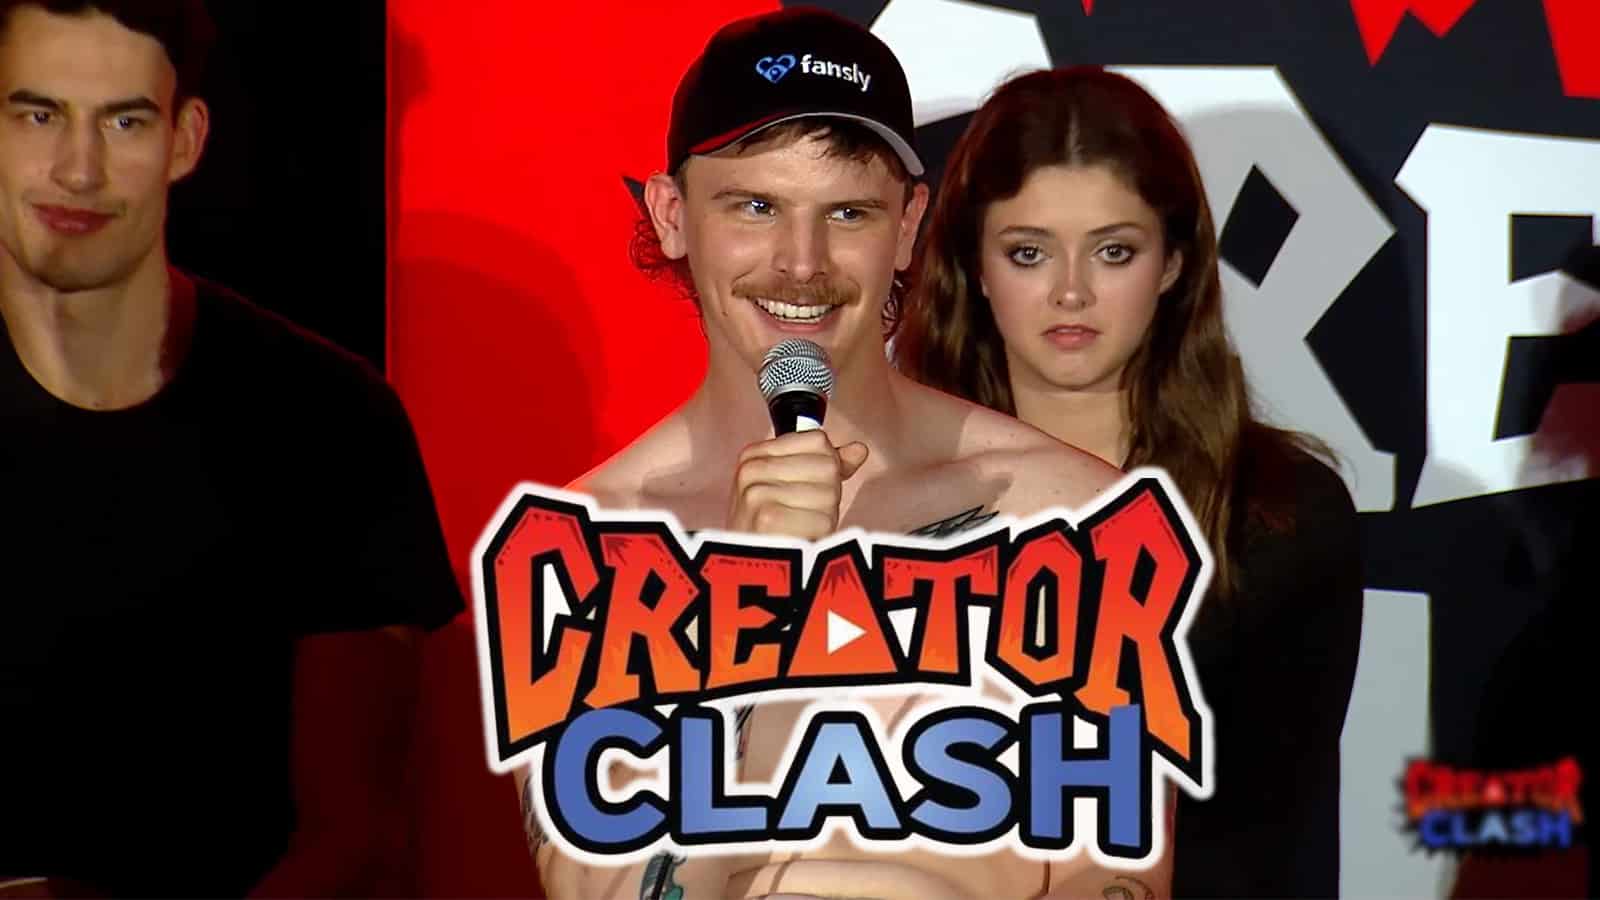 JustaMinx Reacts to the Other Creator Clash Fights